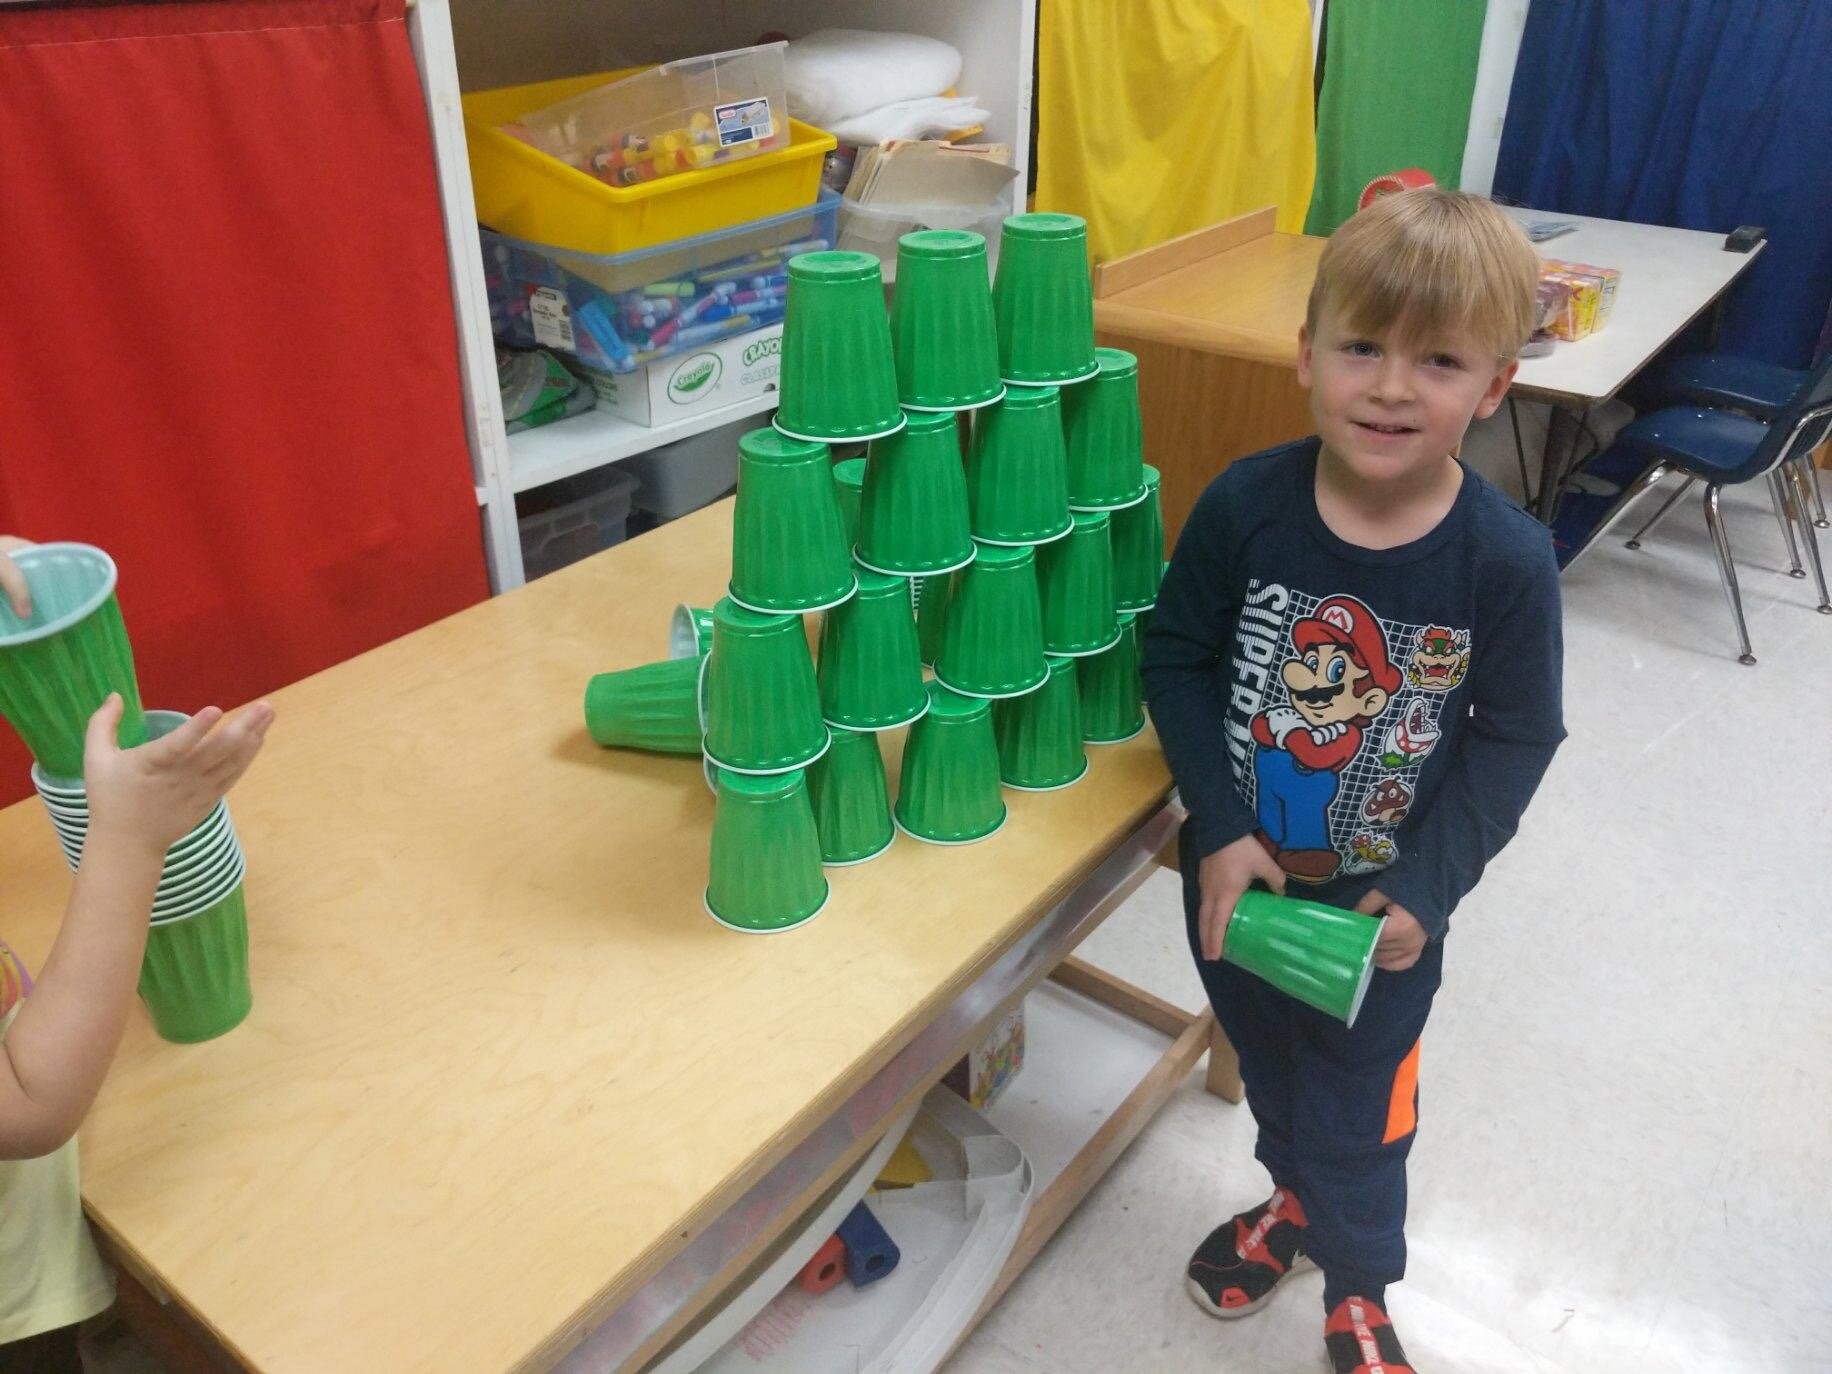 Solo Cup Stacking Challenge! 3-5 Maker felt the pressure in this